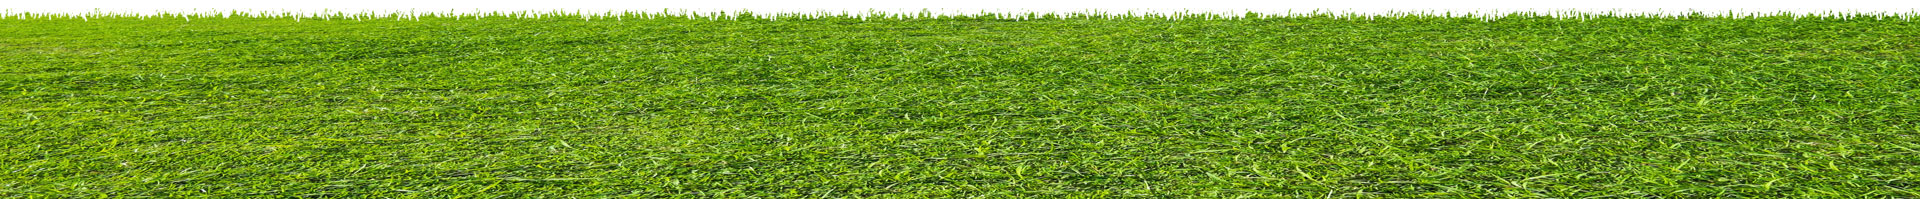 Background image of grass